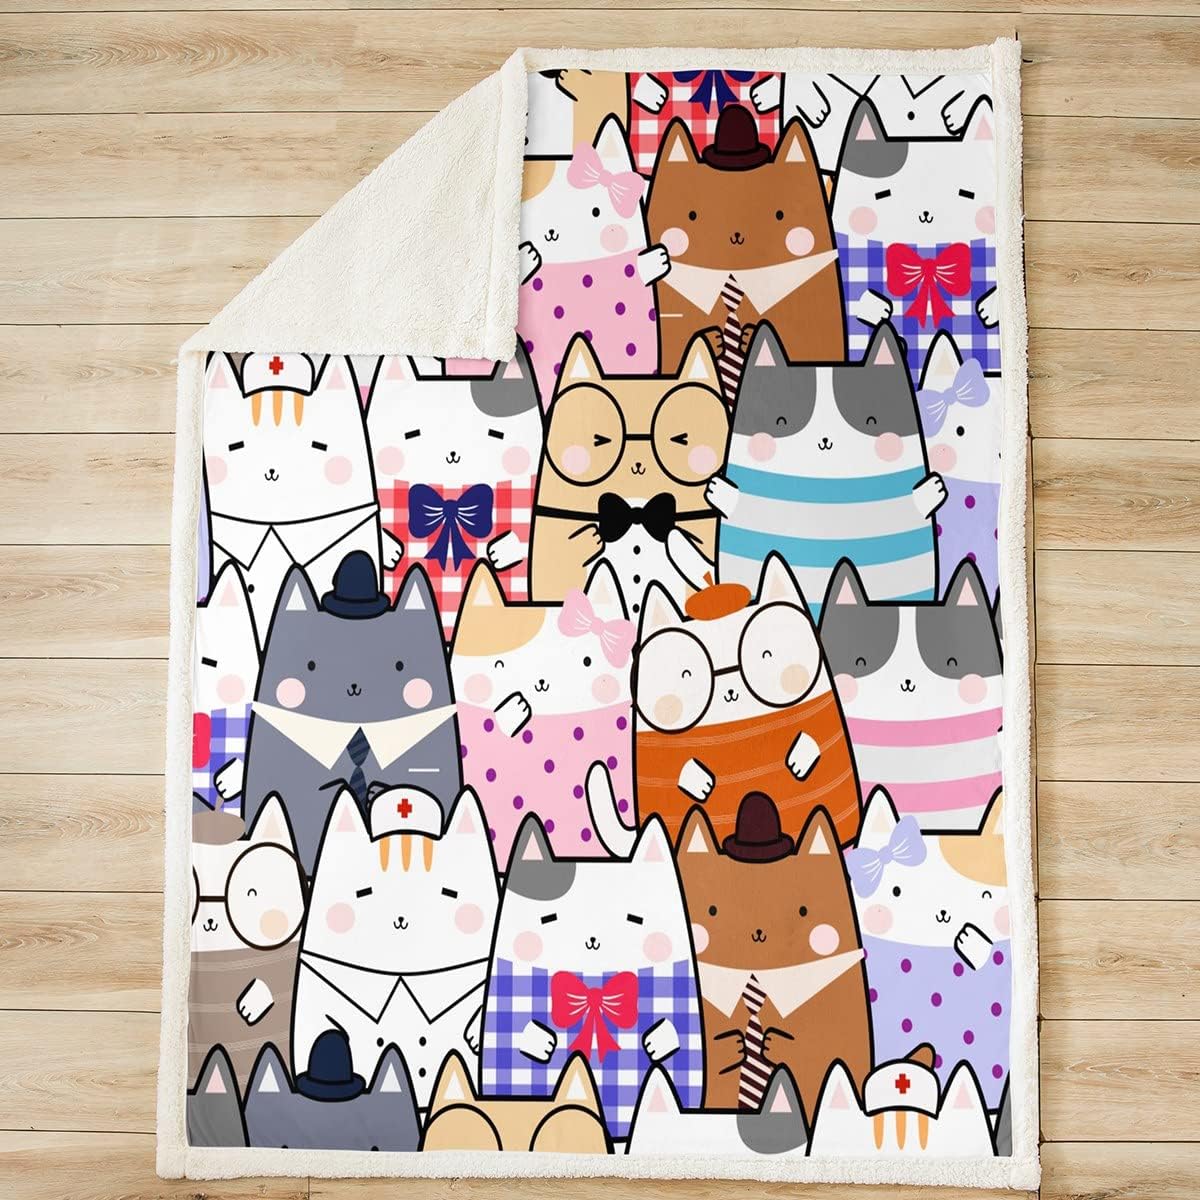 Fuzzy Blanket - Cute Cats and Kittens Sherpa Throw